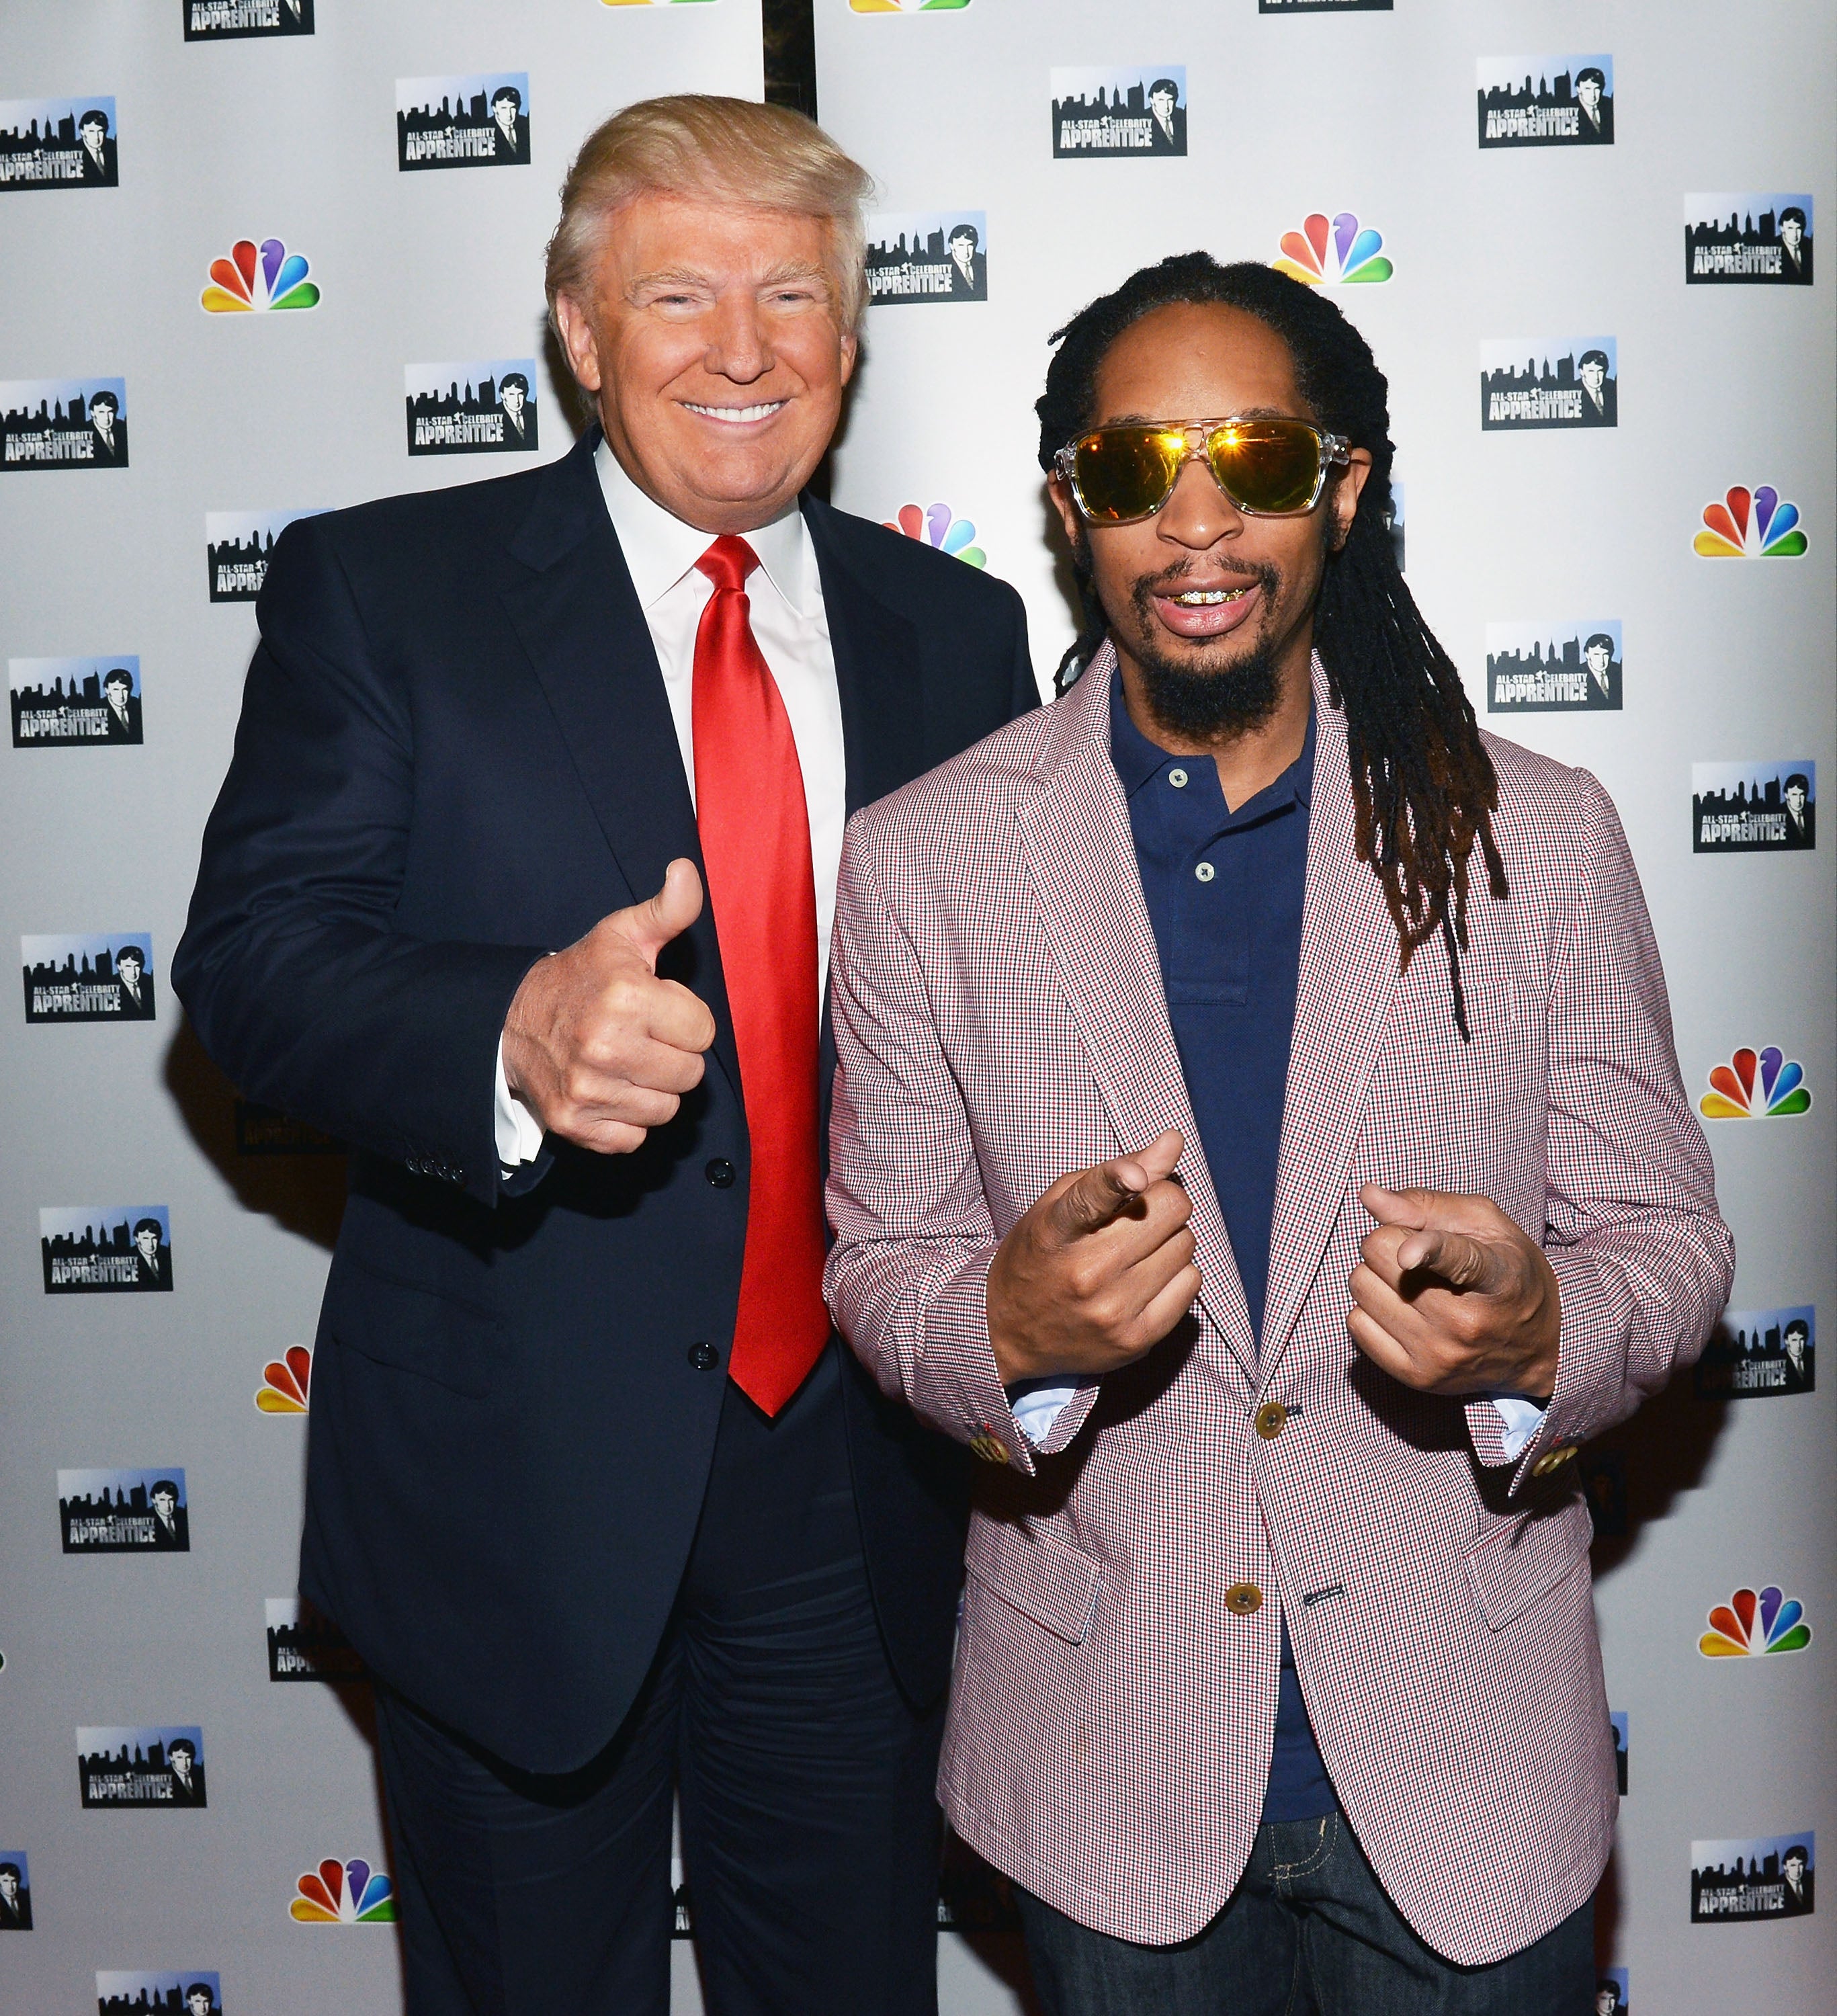 Trump Called Lil Jon An 'Uncle Tom' During Celebrity Apprentice
